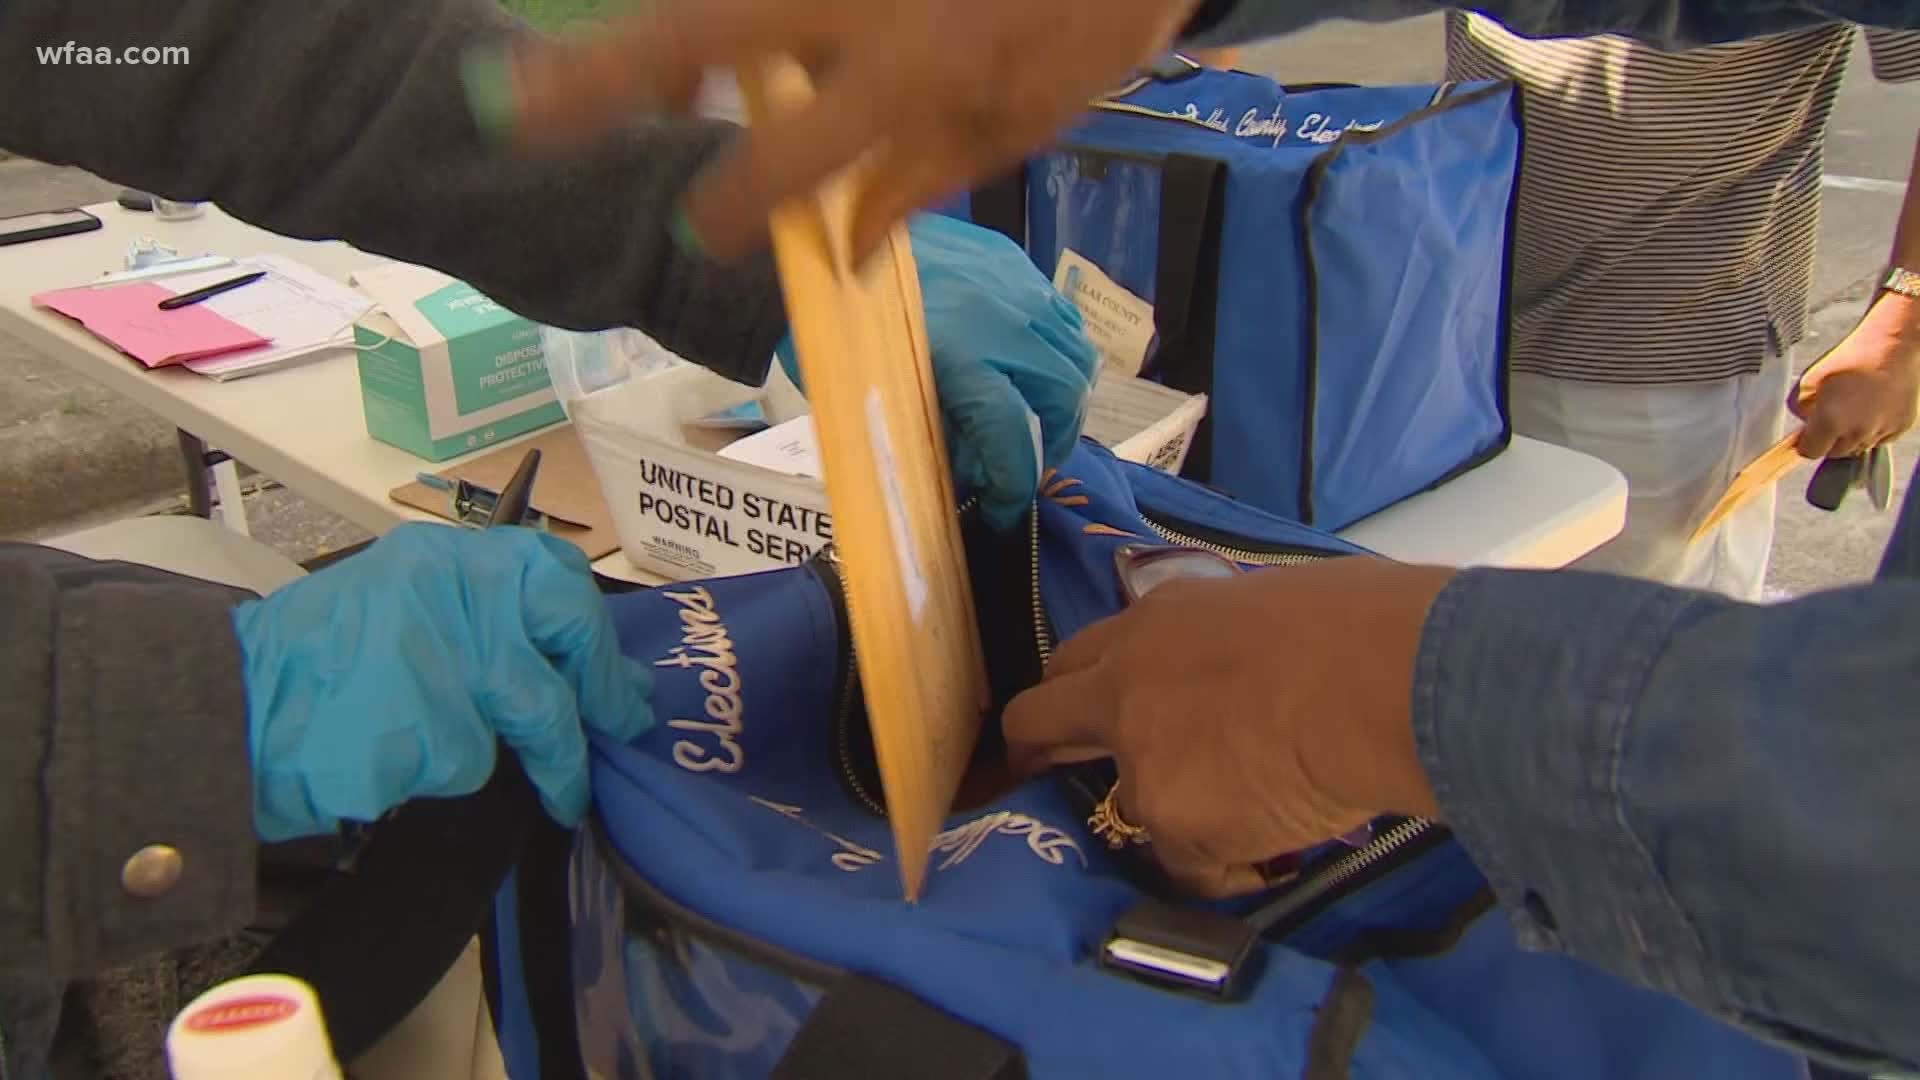 There have already been 20,000 voters asking for mail-in ballots in Dallas County.